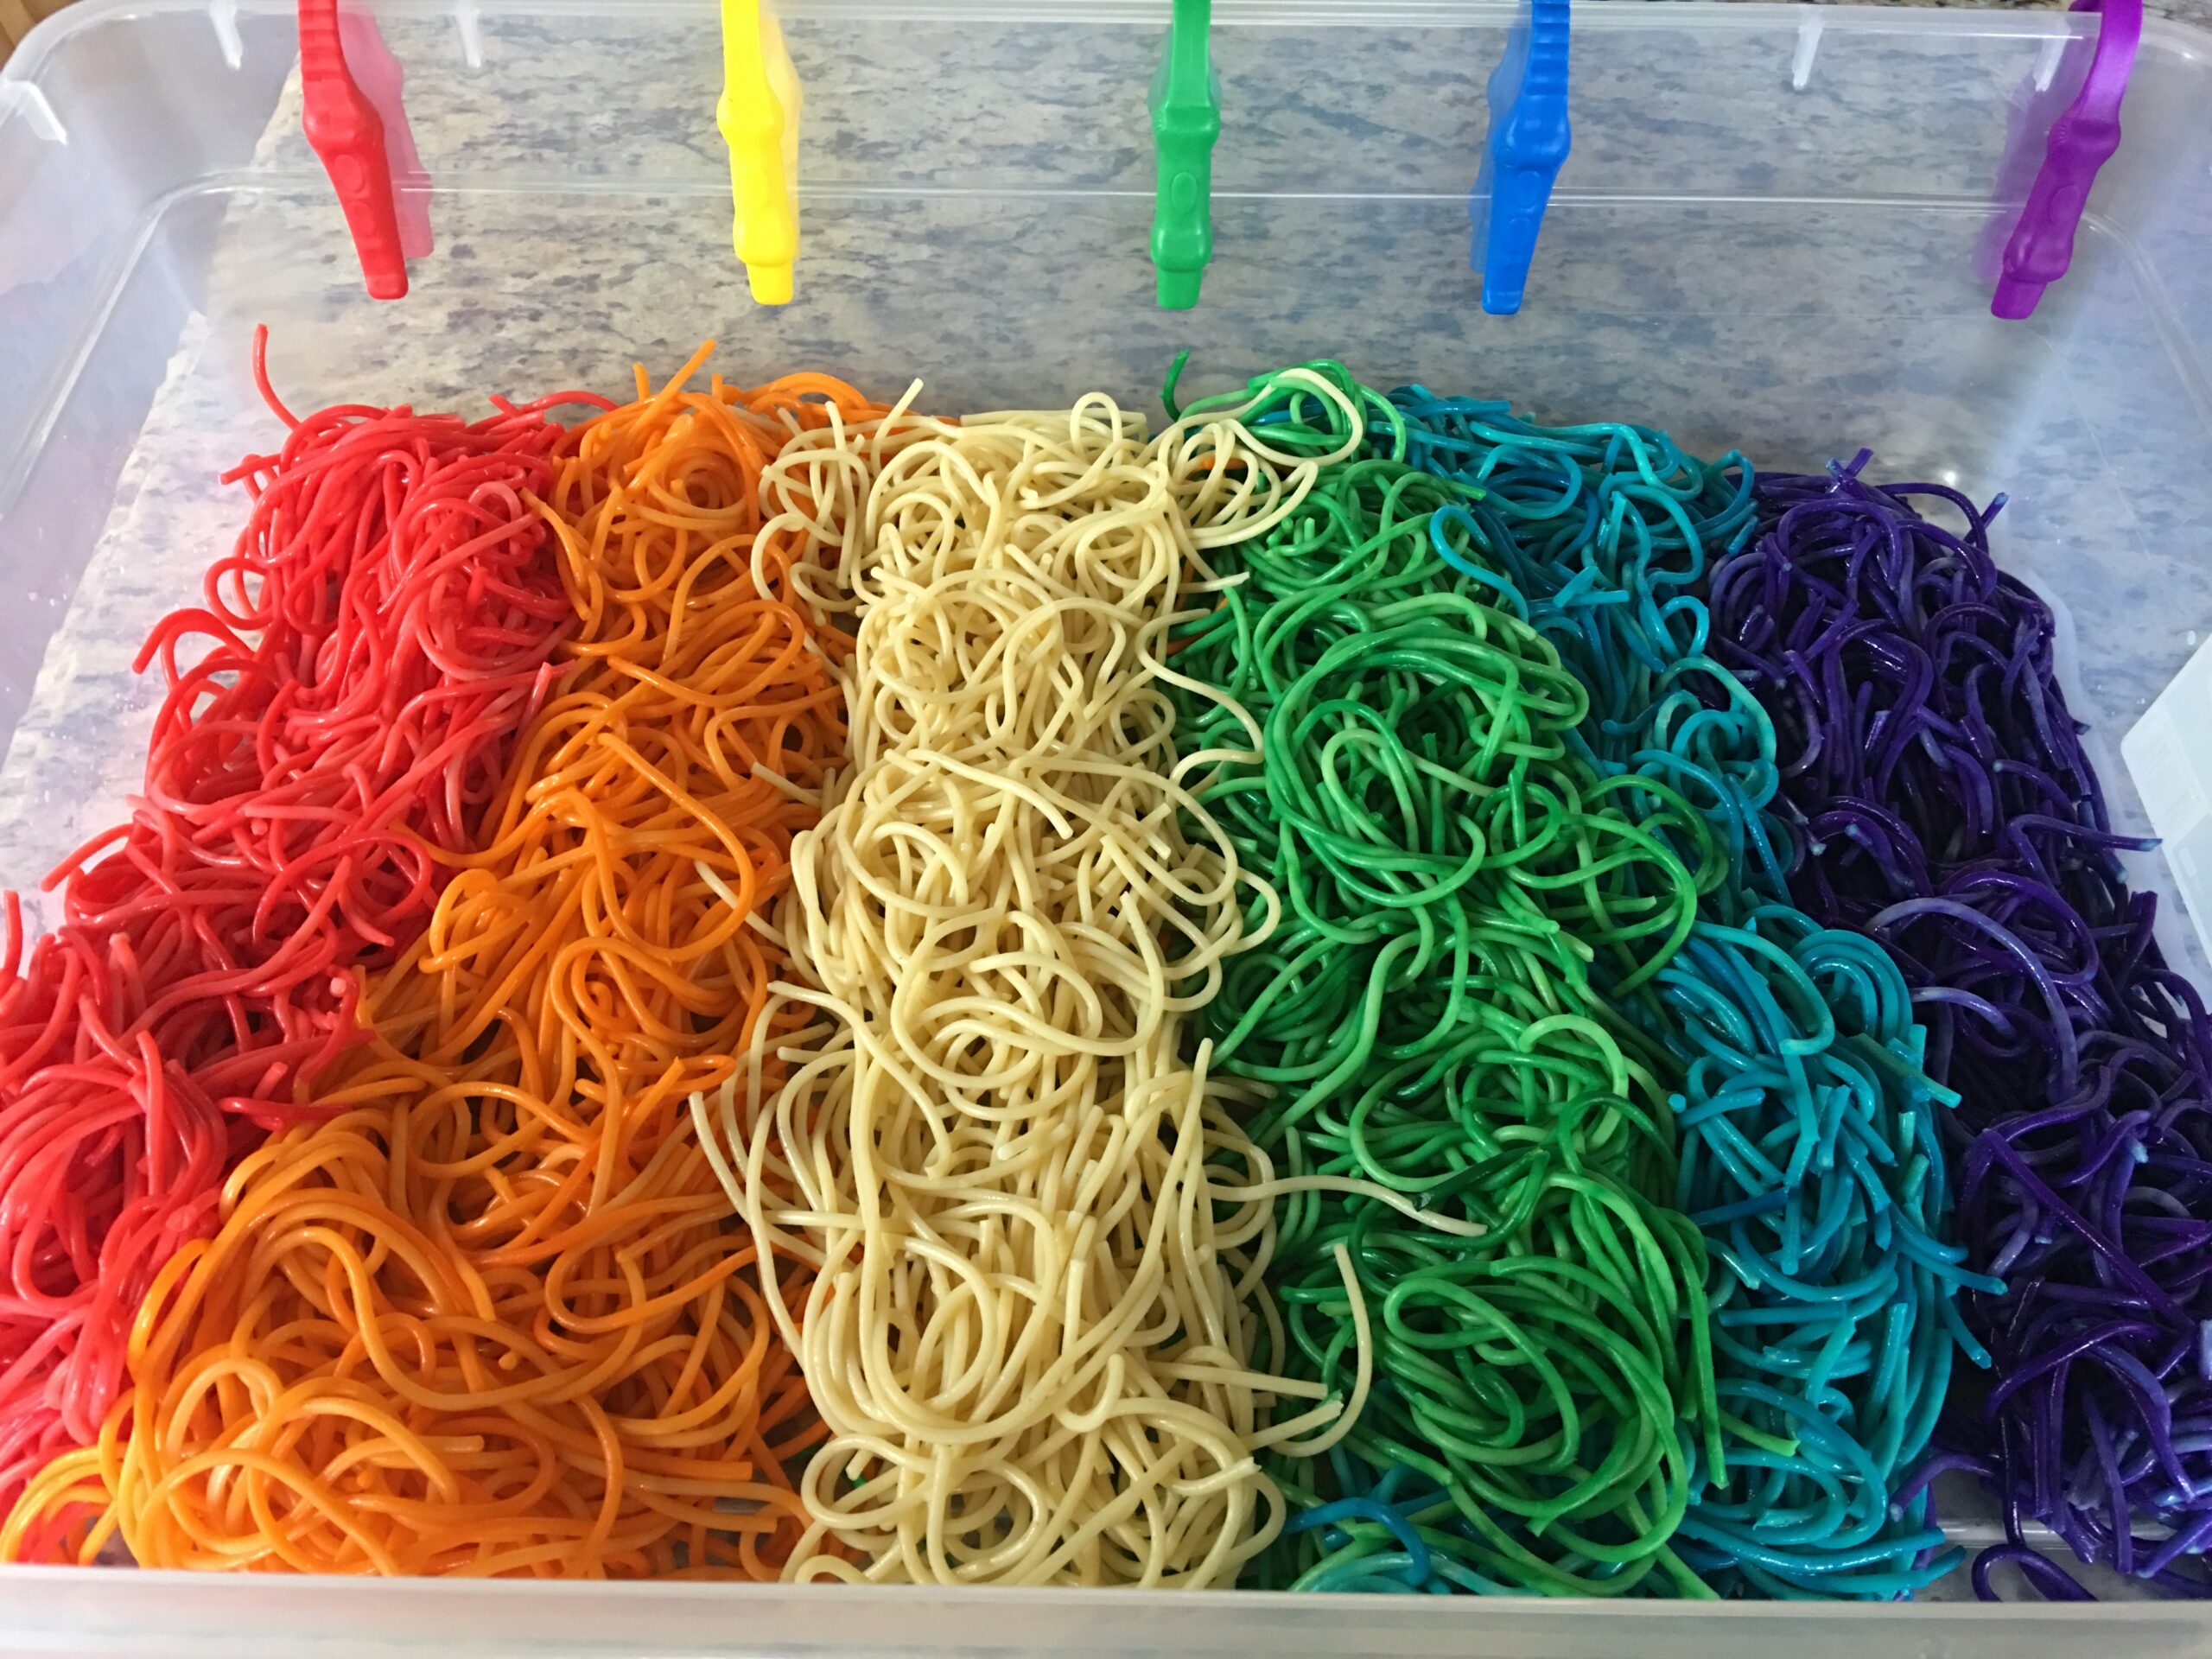 Rainbow Pasta sensory bins - sensory play is so theraputic for children, great way to increase fine motor skills and provides a safe environment for exploring.